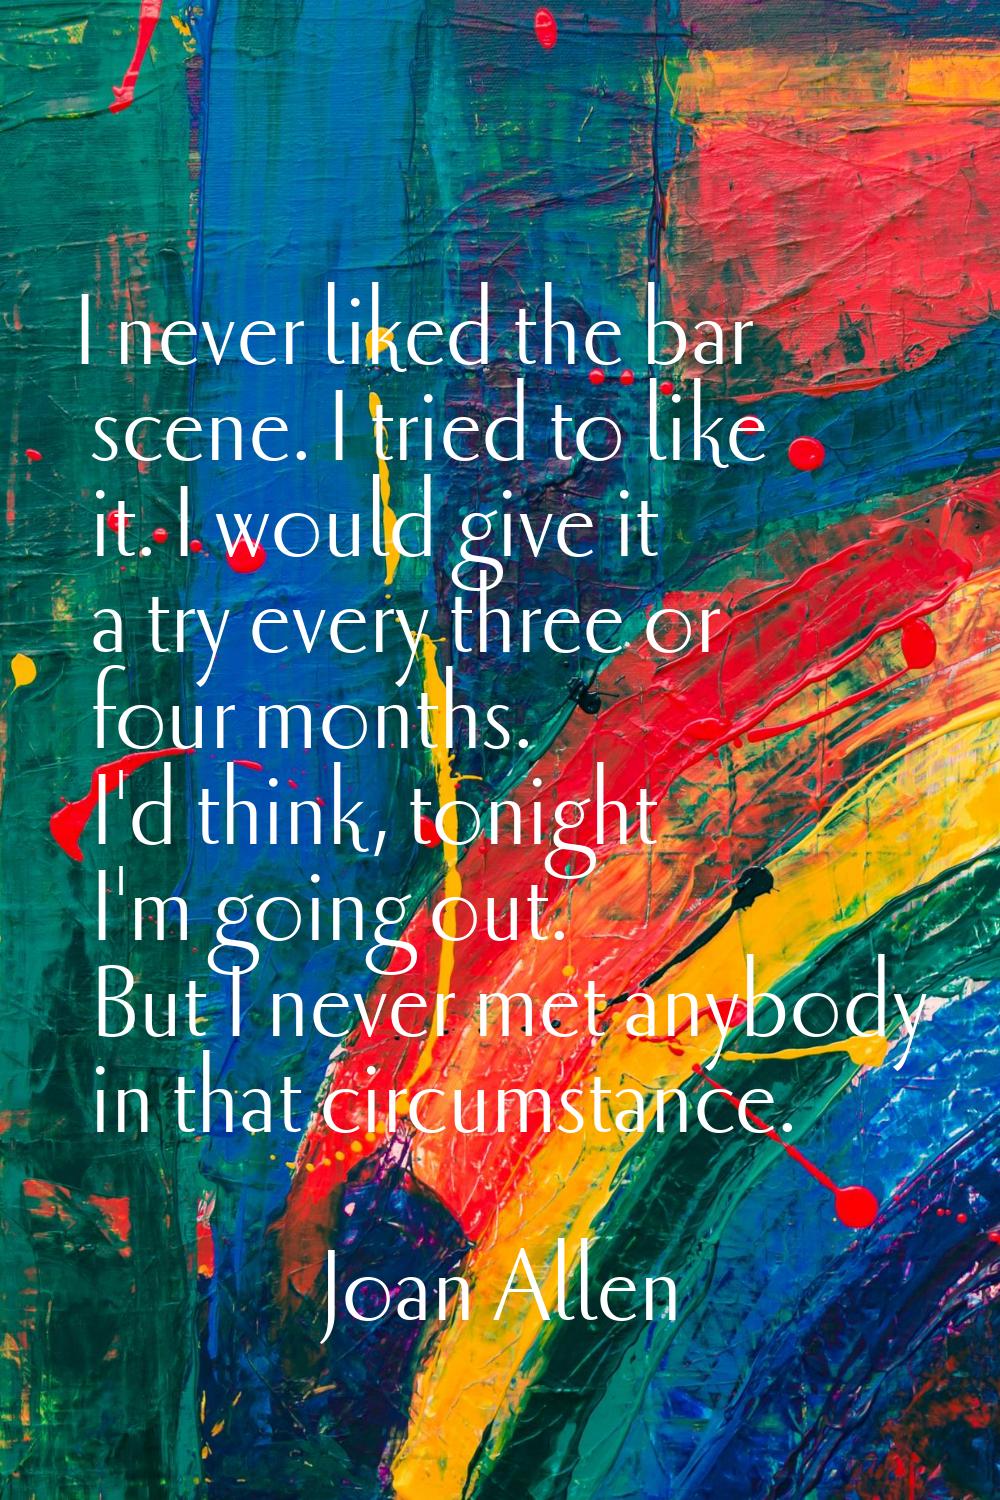 I never liked the bar scene. I tried to like it. I would give it a try every three or four months. 